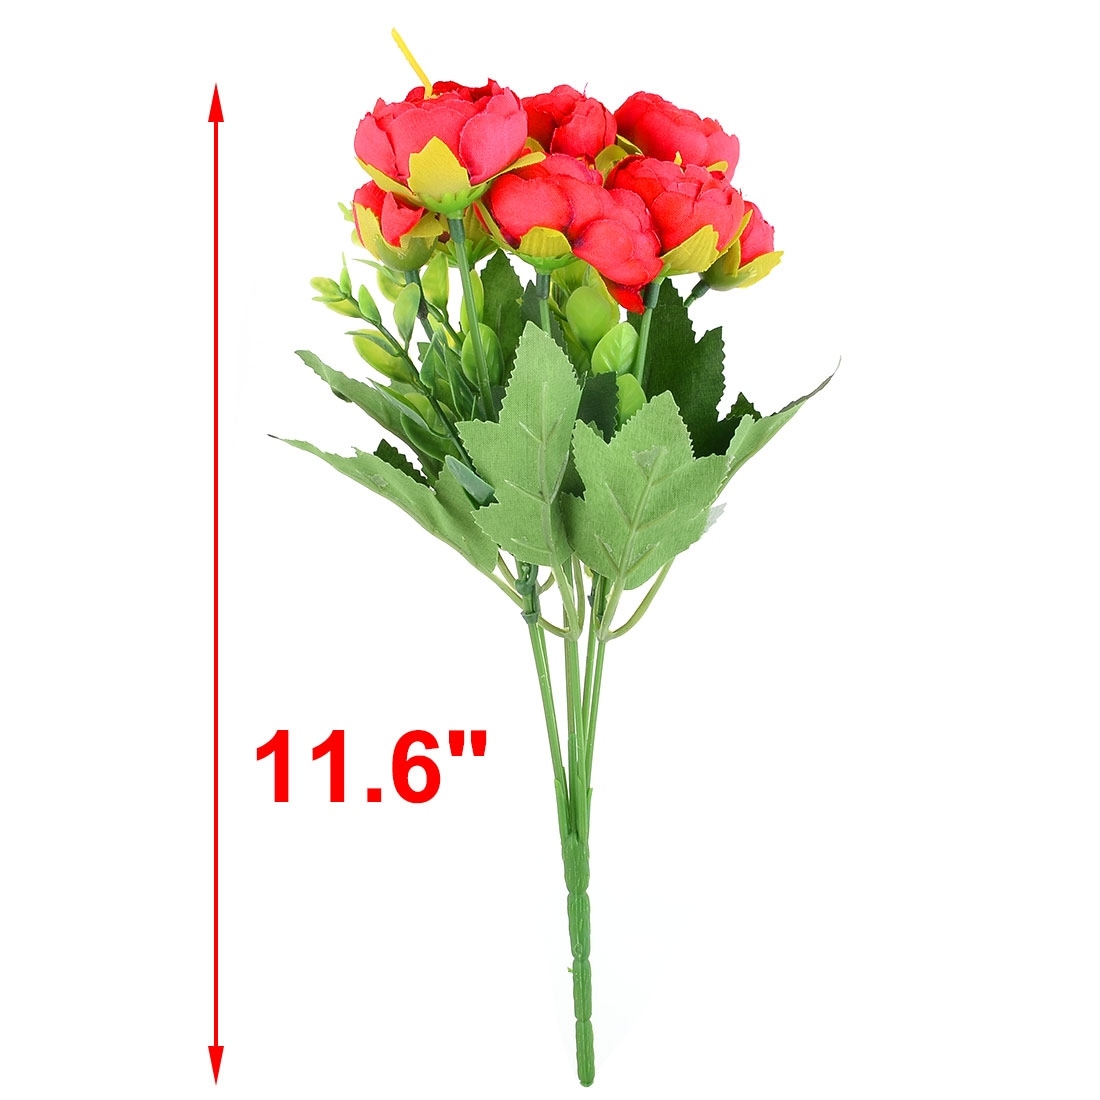 Shop Wedding Fabric Camellia Shaped Diy Craft Decor Artificial Flower Bouquet Red 2pcs On Sale Overstock 28898594